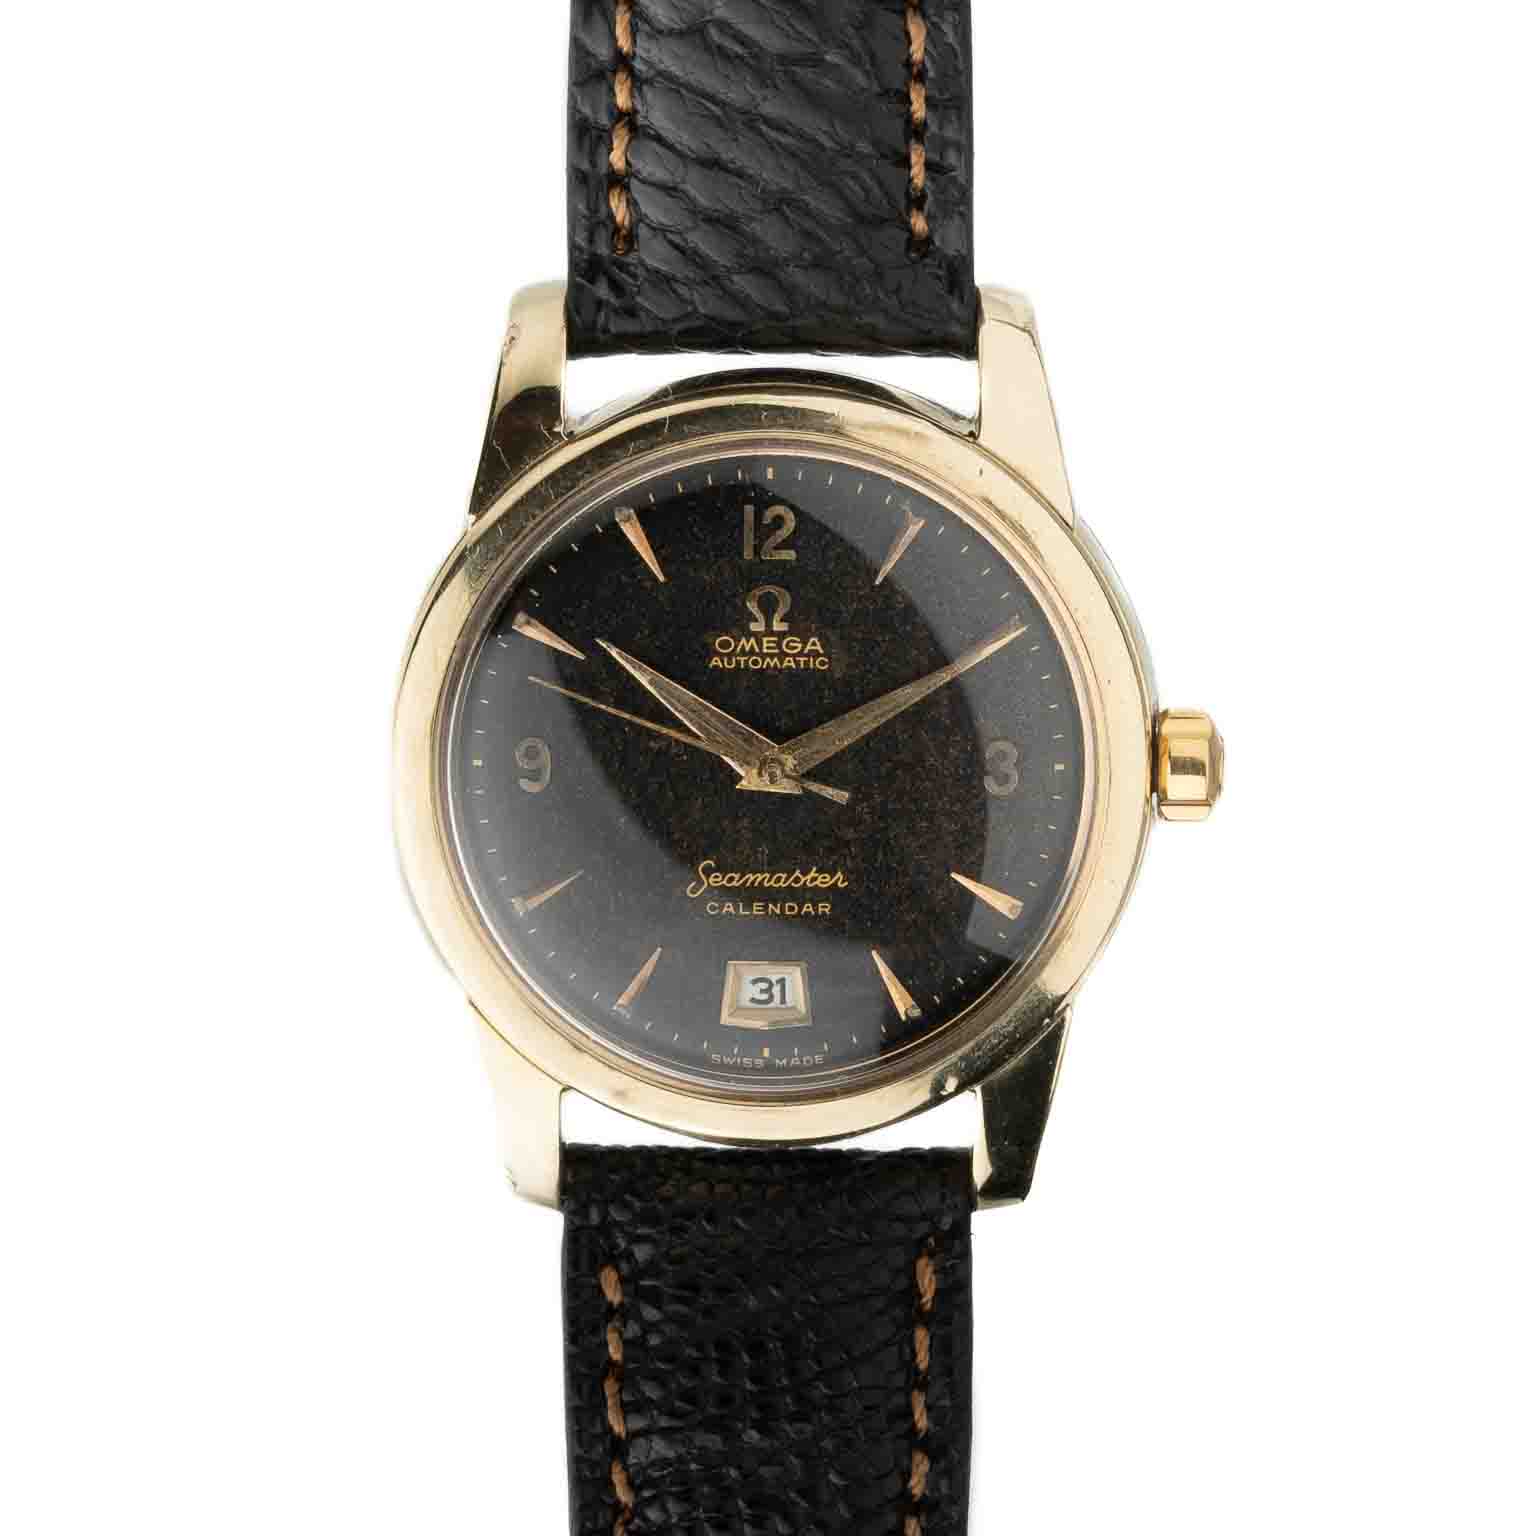 Vintage Omega Seamaster calandar with patinated black dial gold capped 2757-11 from 1955